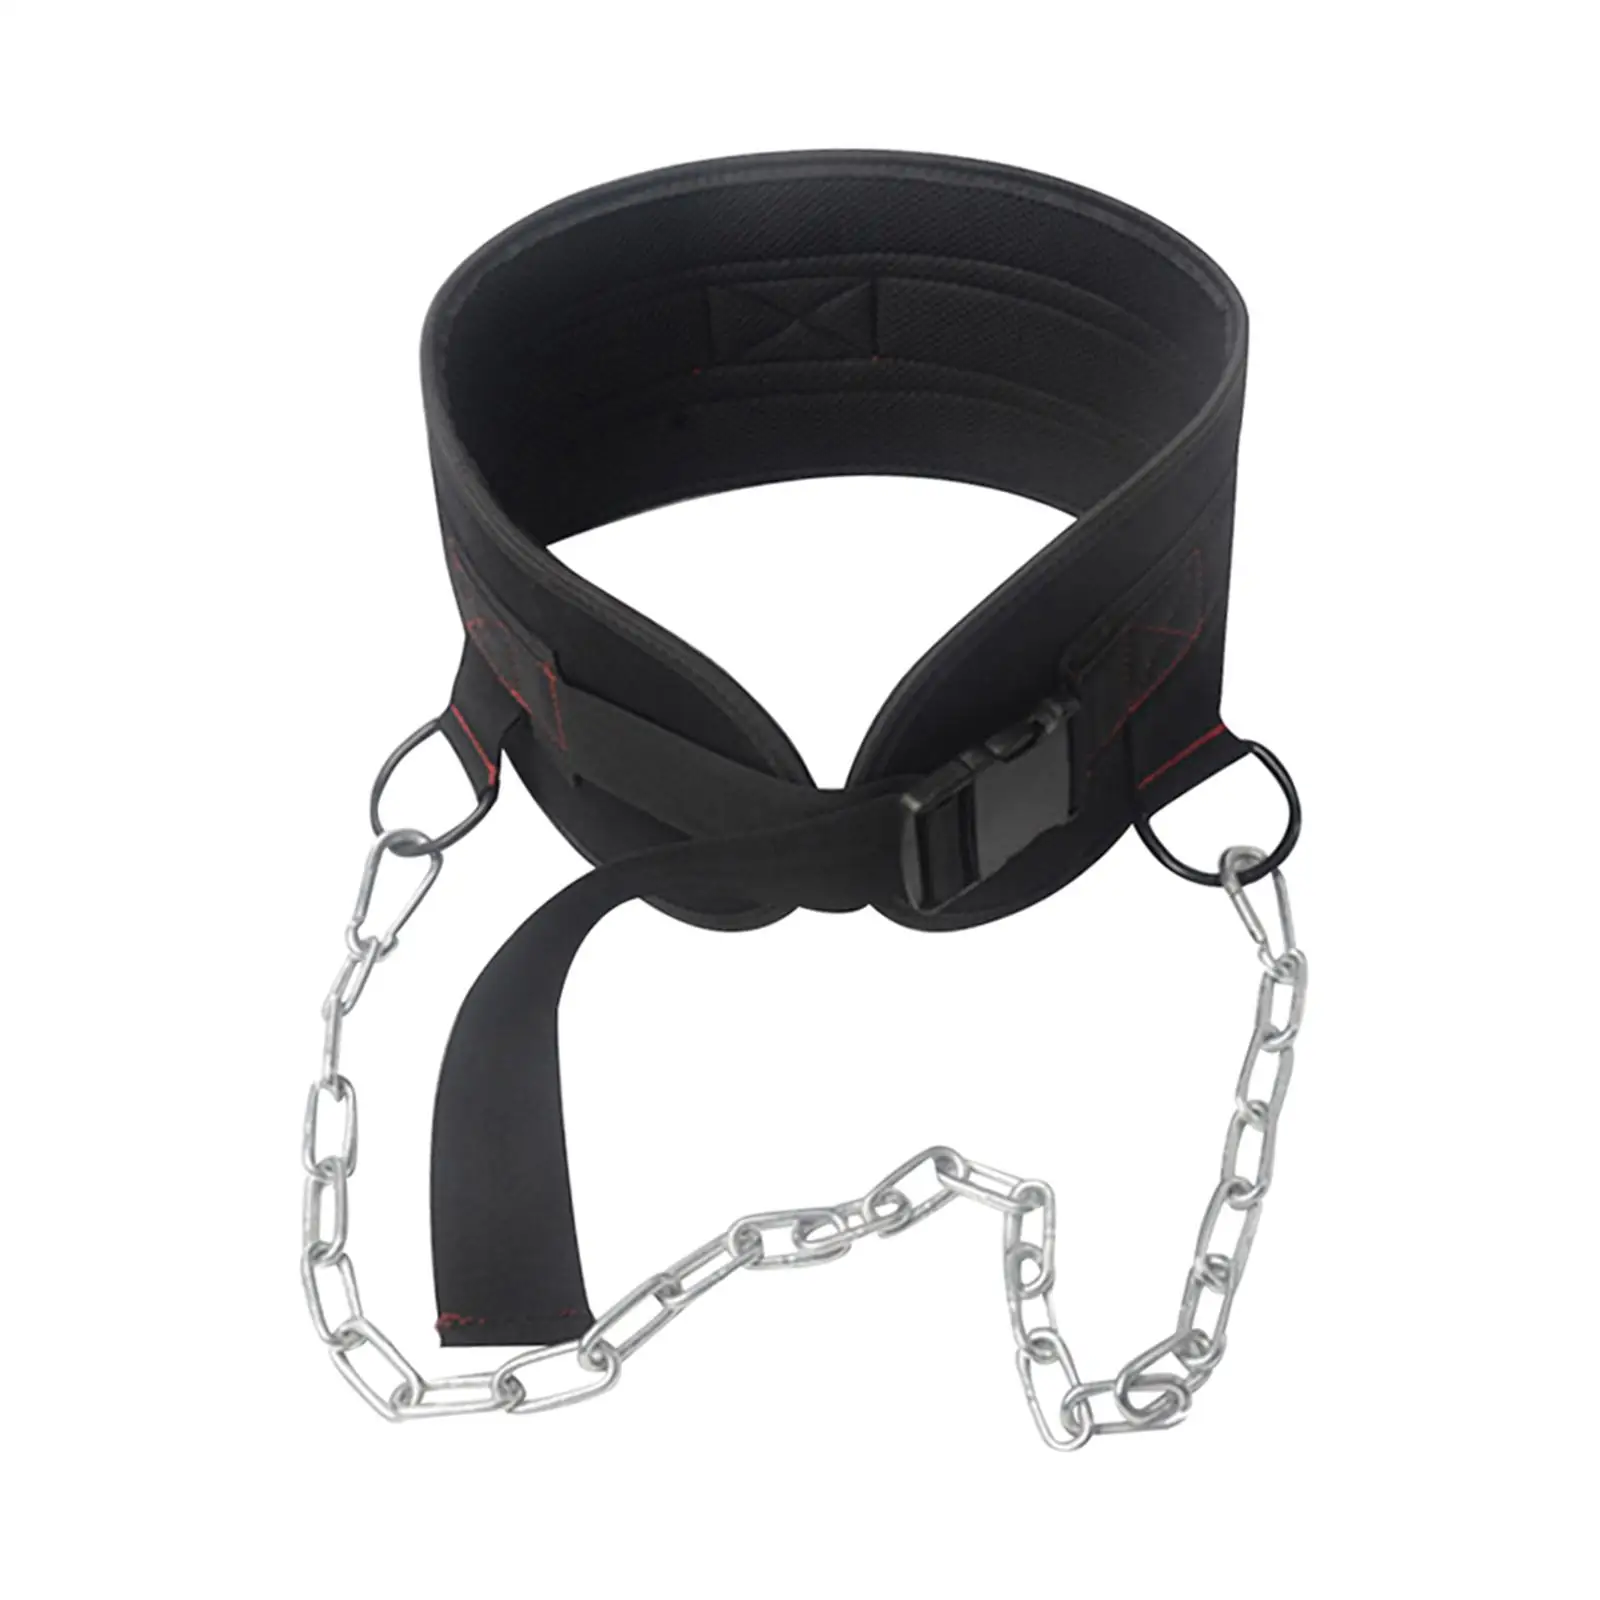 Weightlifting Dipping Belt with Chain for Training Exercise Bodybuilding